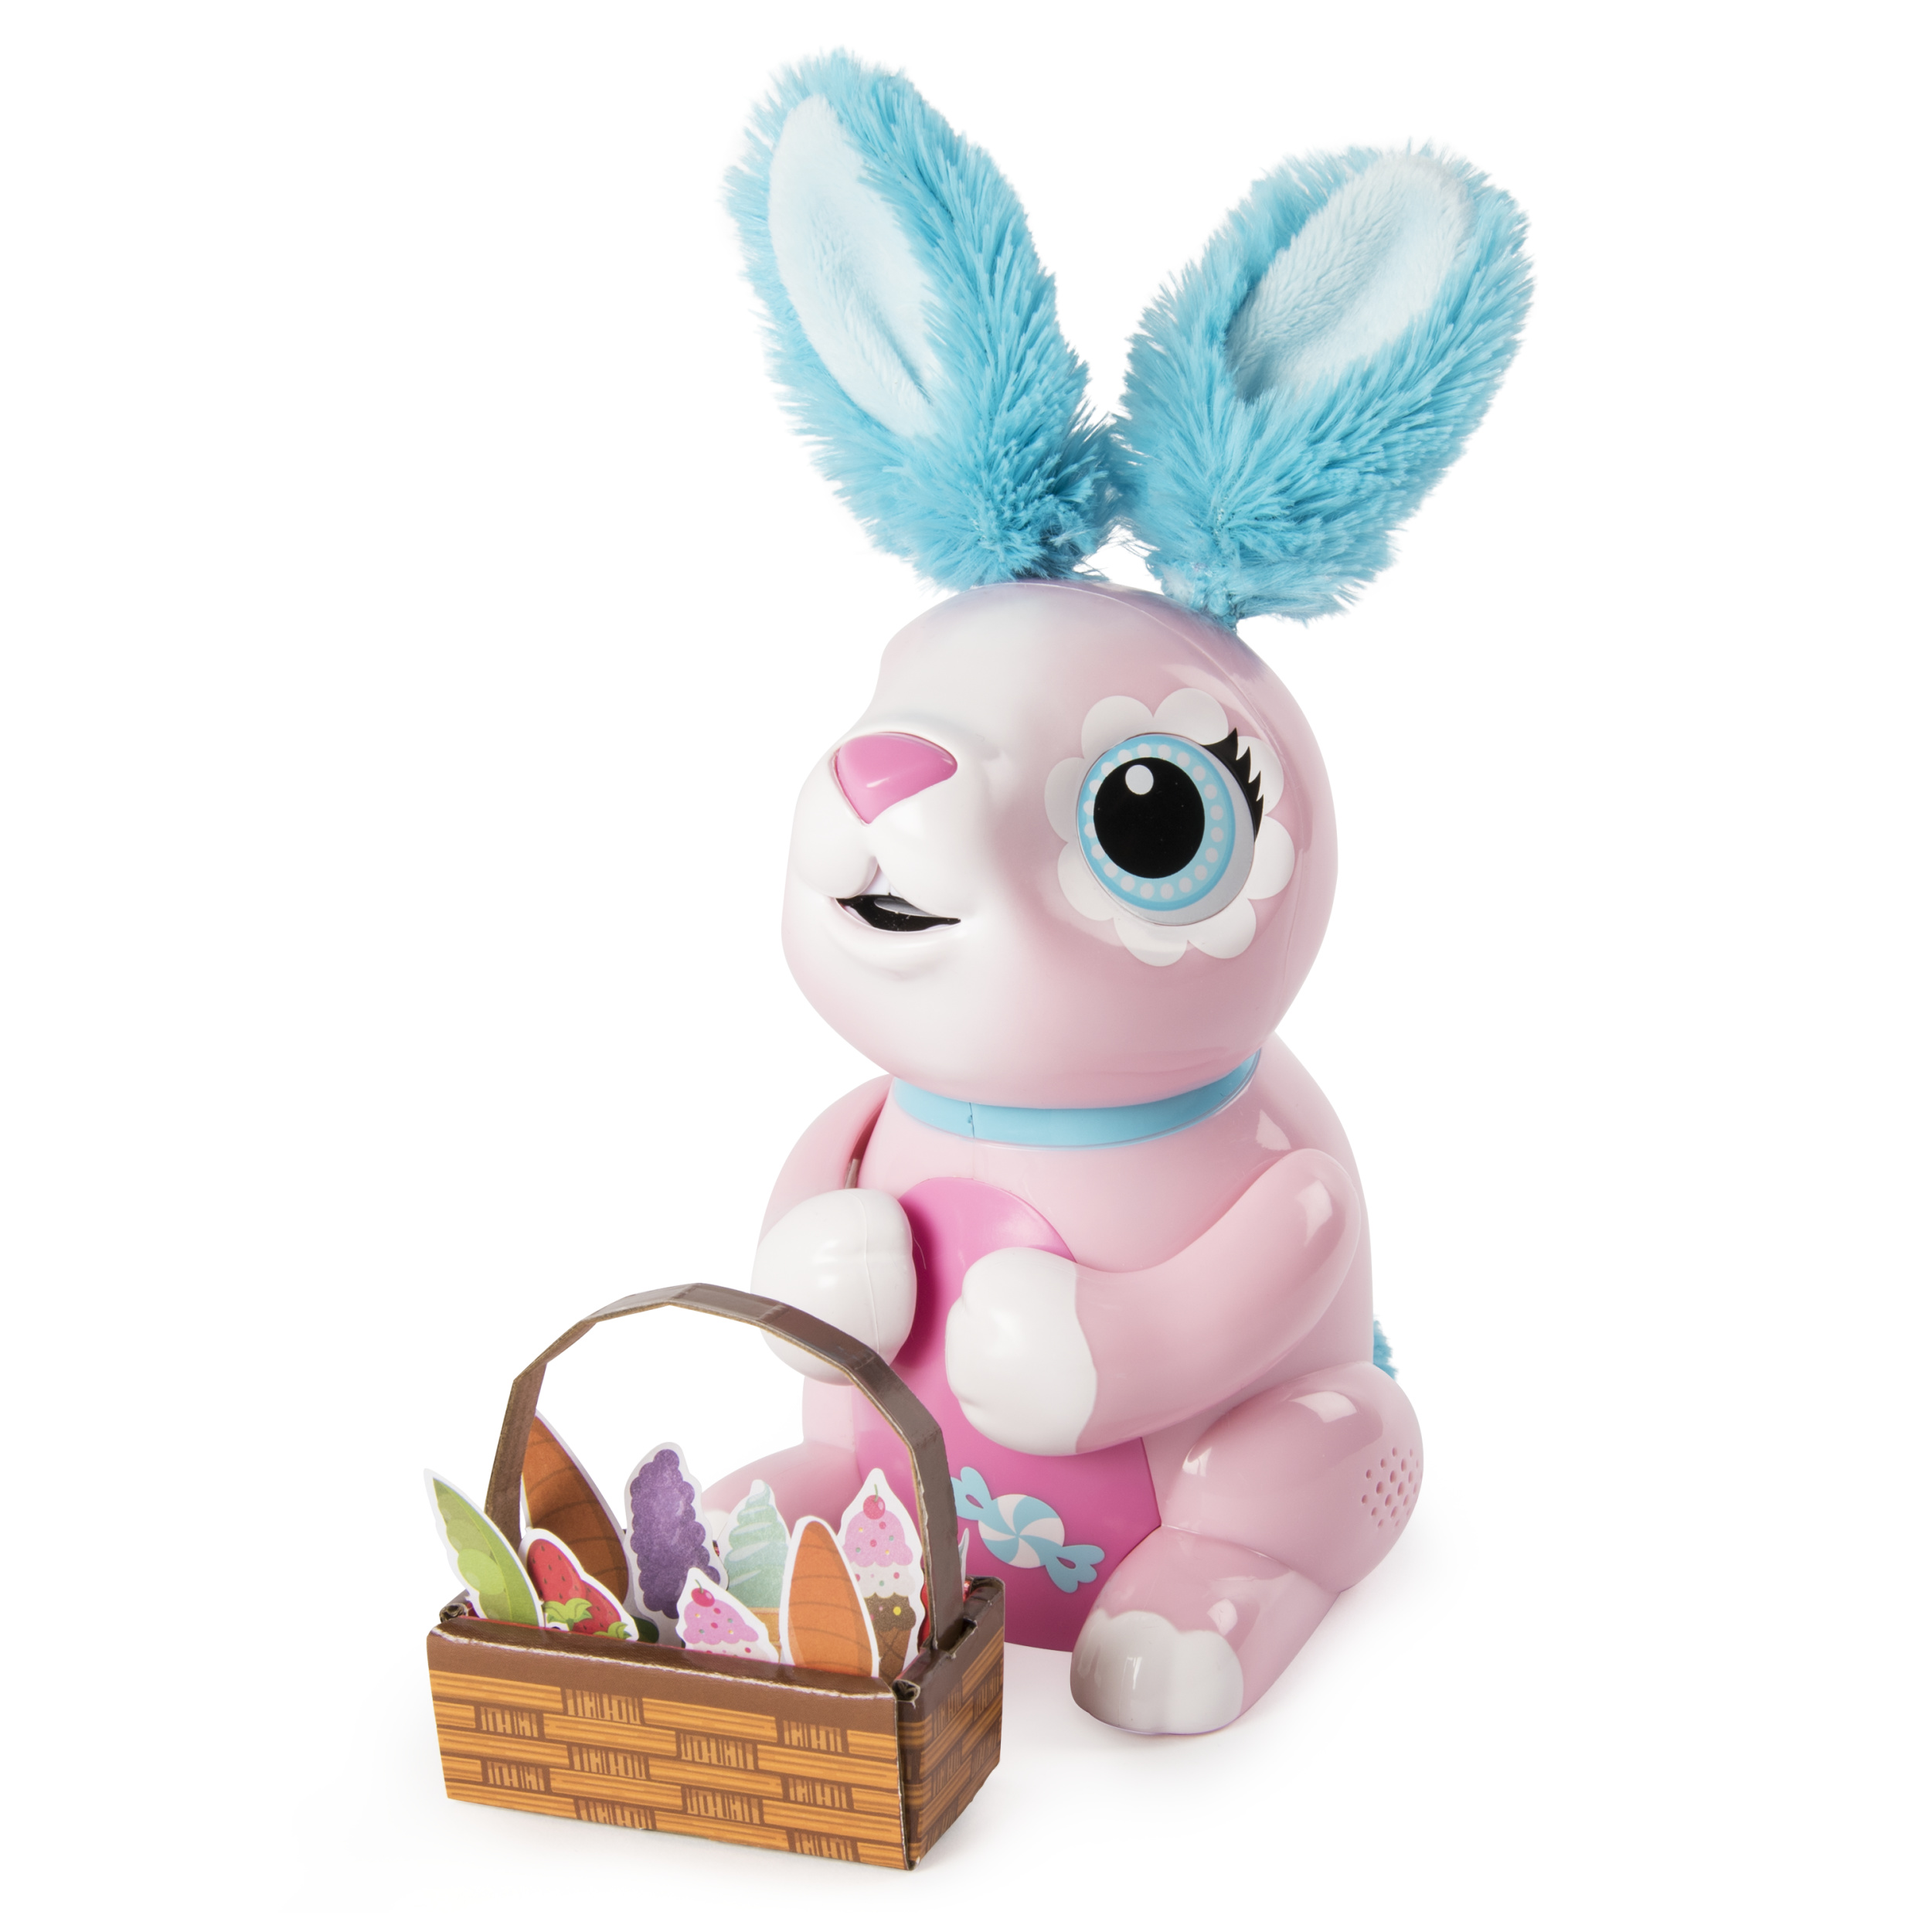 Zoomer - Hungry Bunnies, Shreddy, Interactive Robotic Rabbit that Eats, for Ages 5 and Up - image 1 of 8